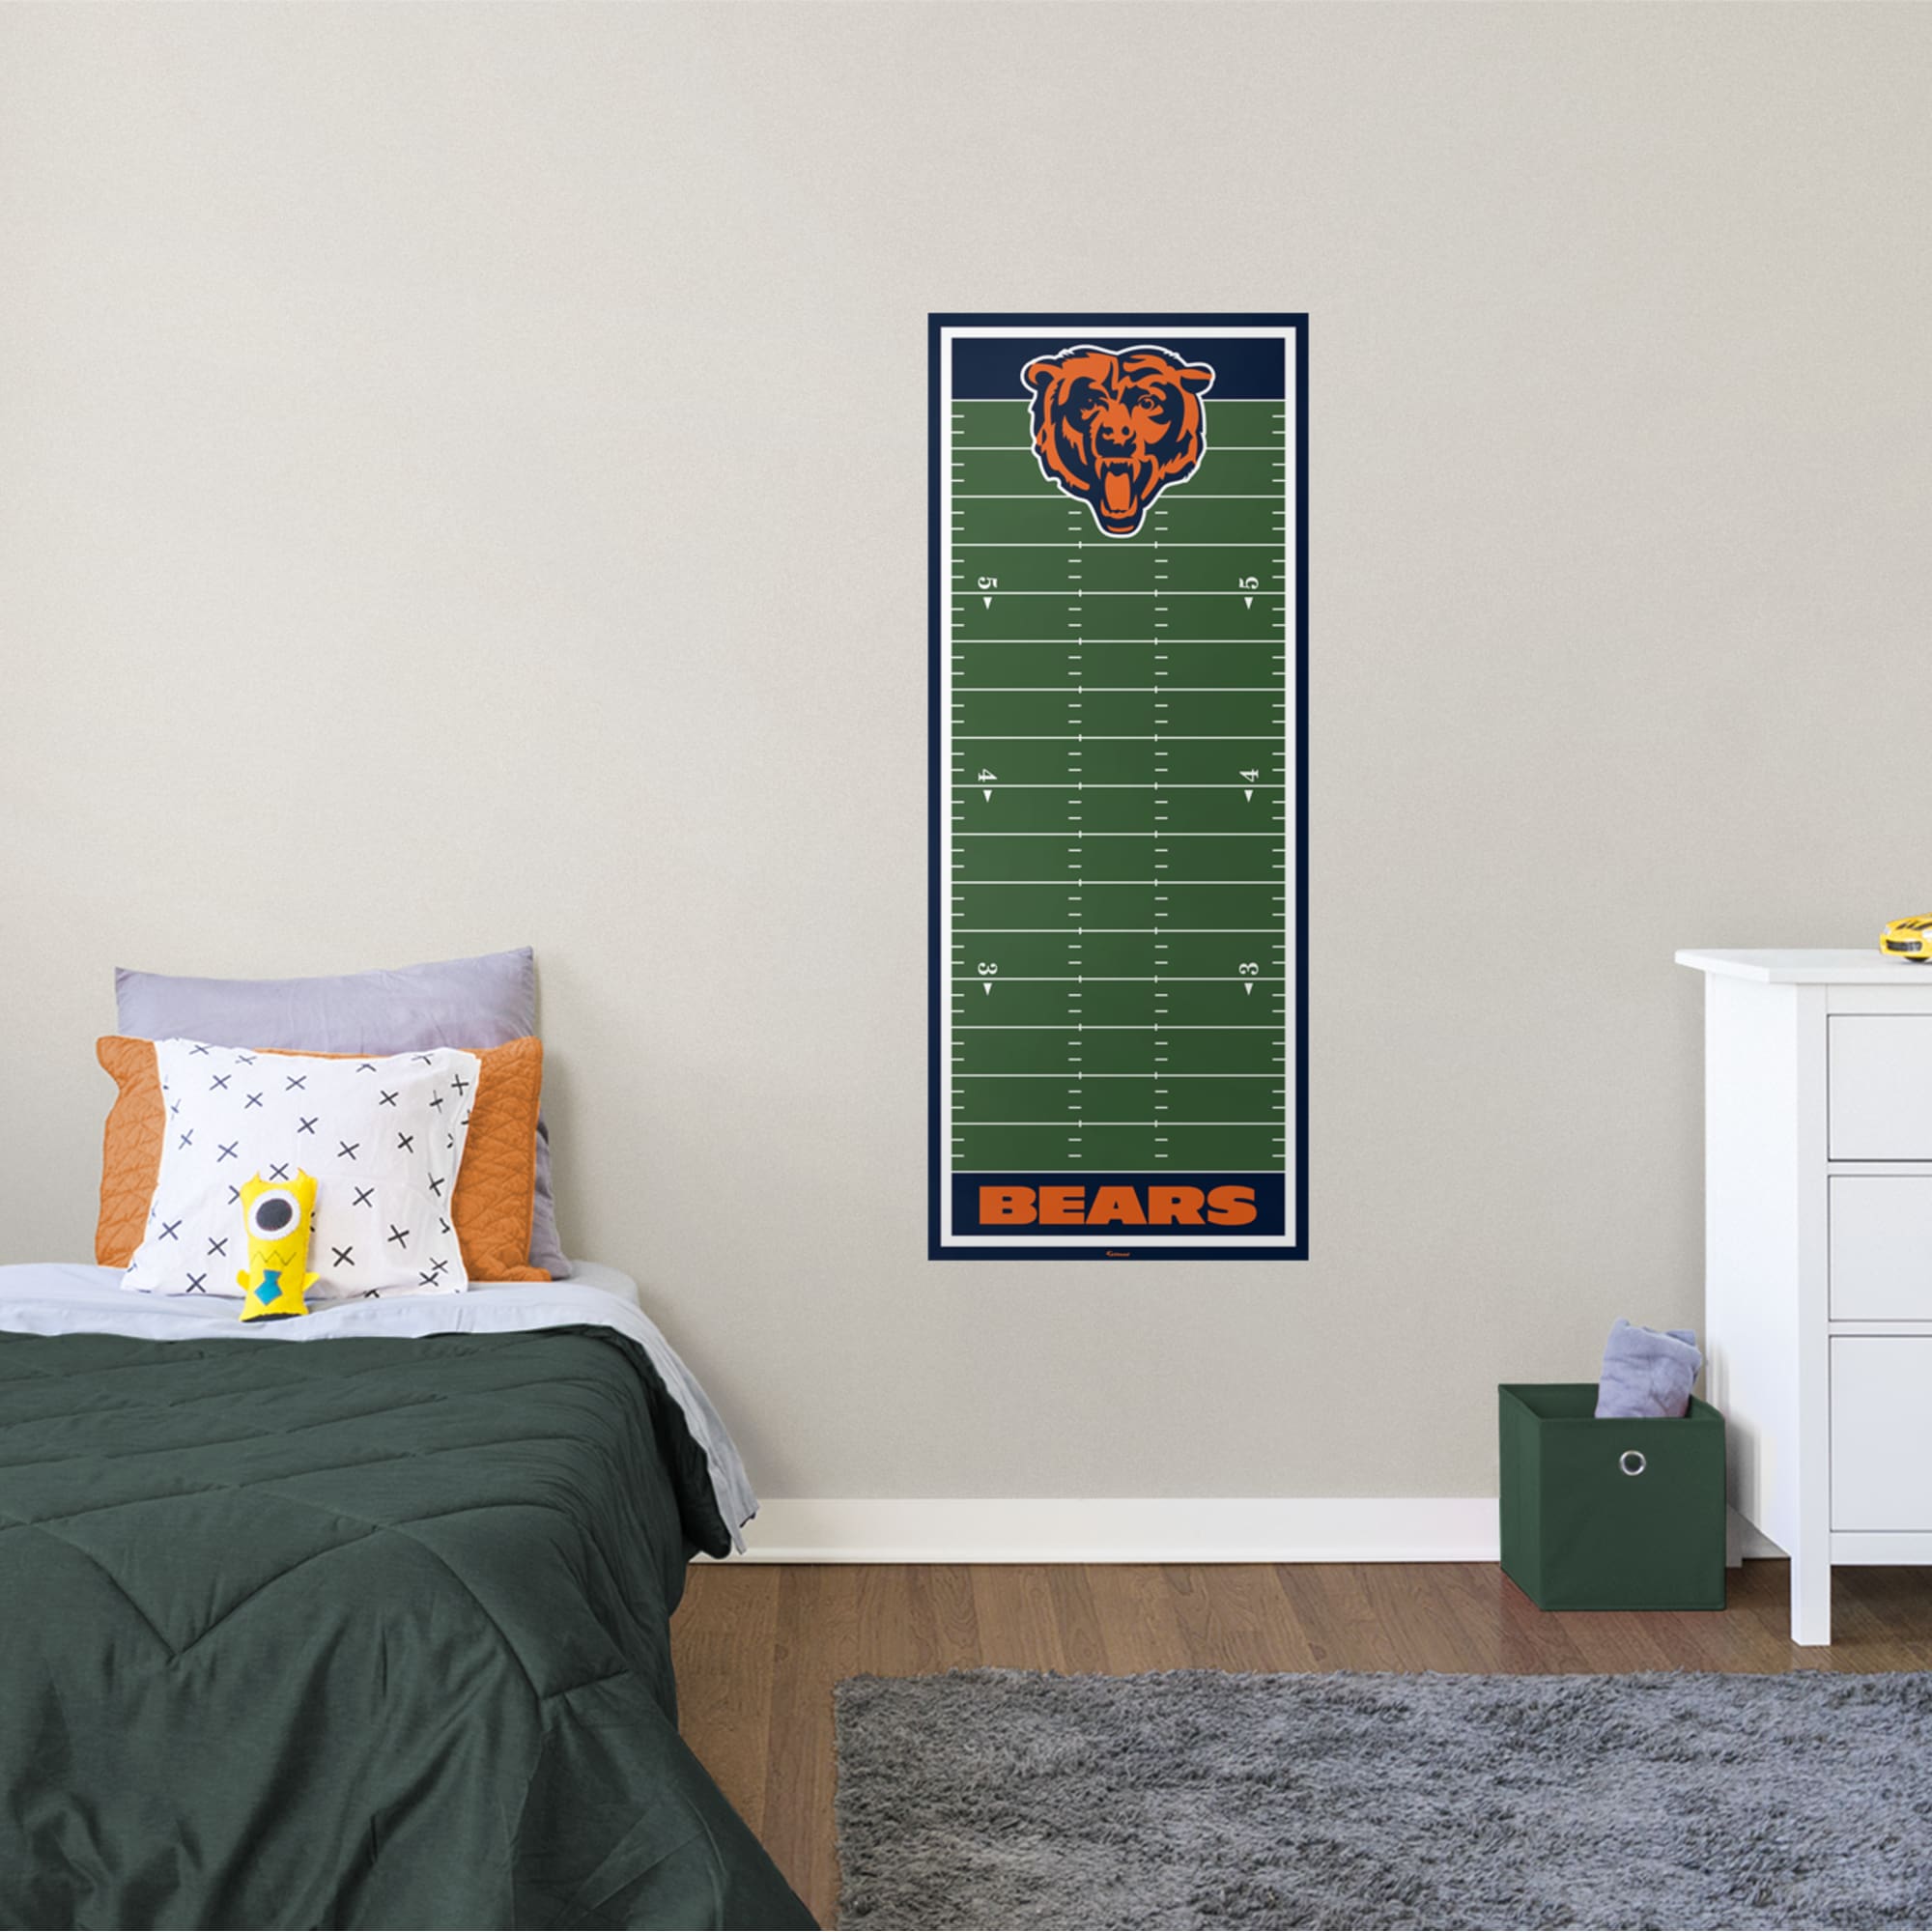 Chicago Bears: Growth Chart - Officially Licensed NFL Removable Wall Graphic 24.0"W x 59.0"H by Fathead | Vinyl